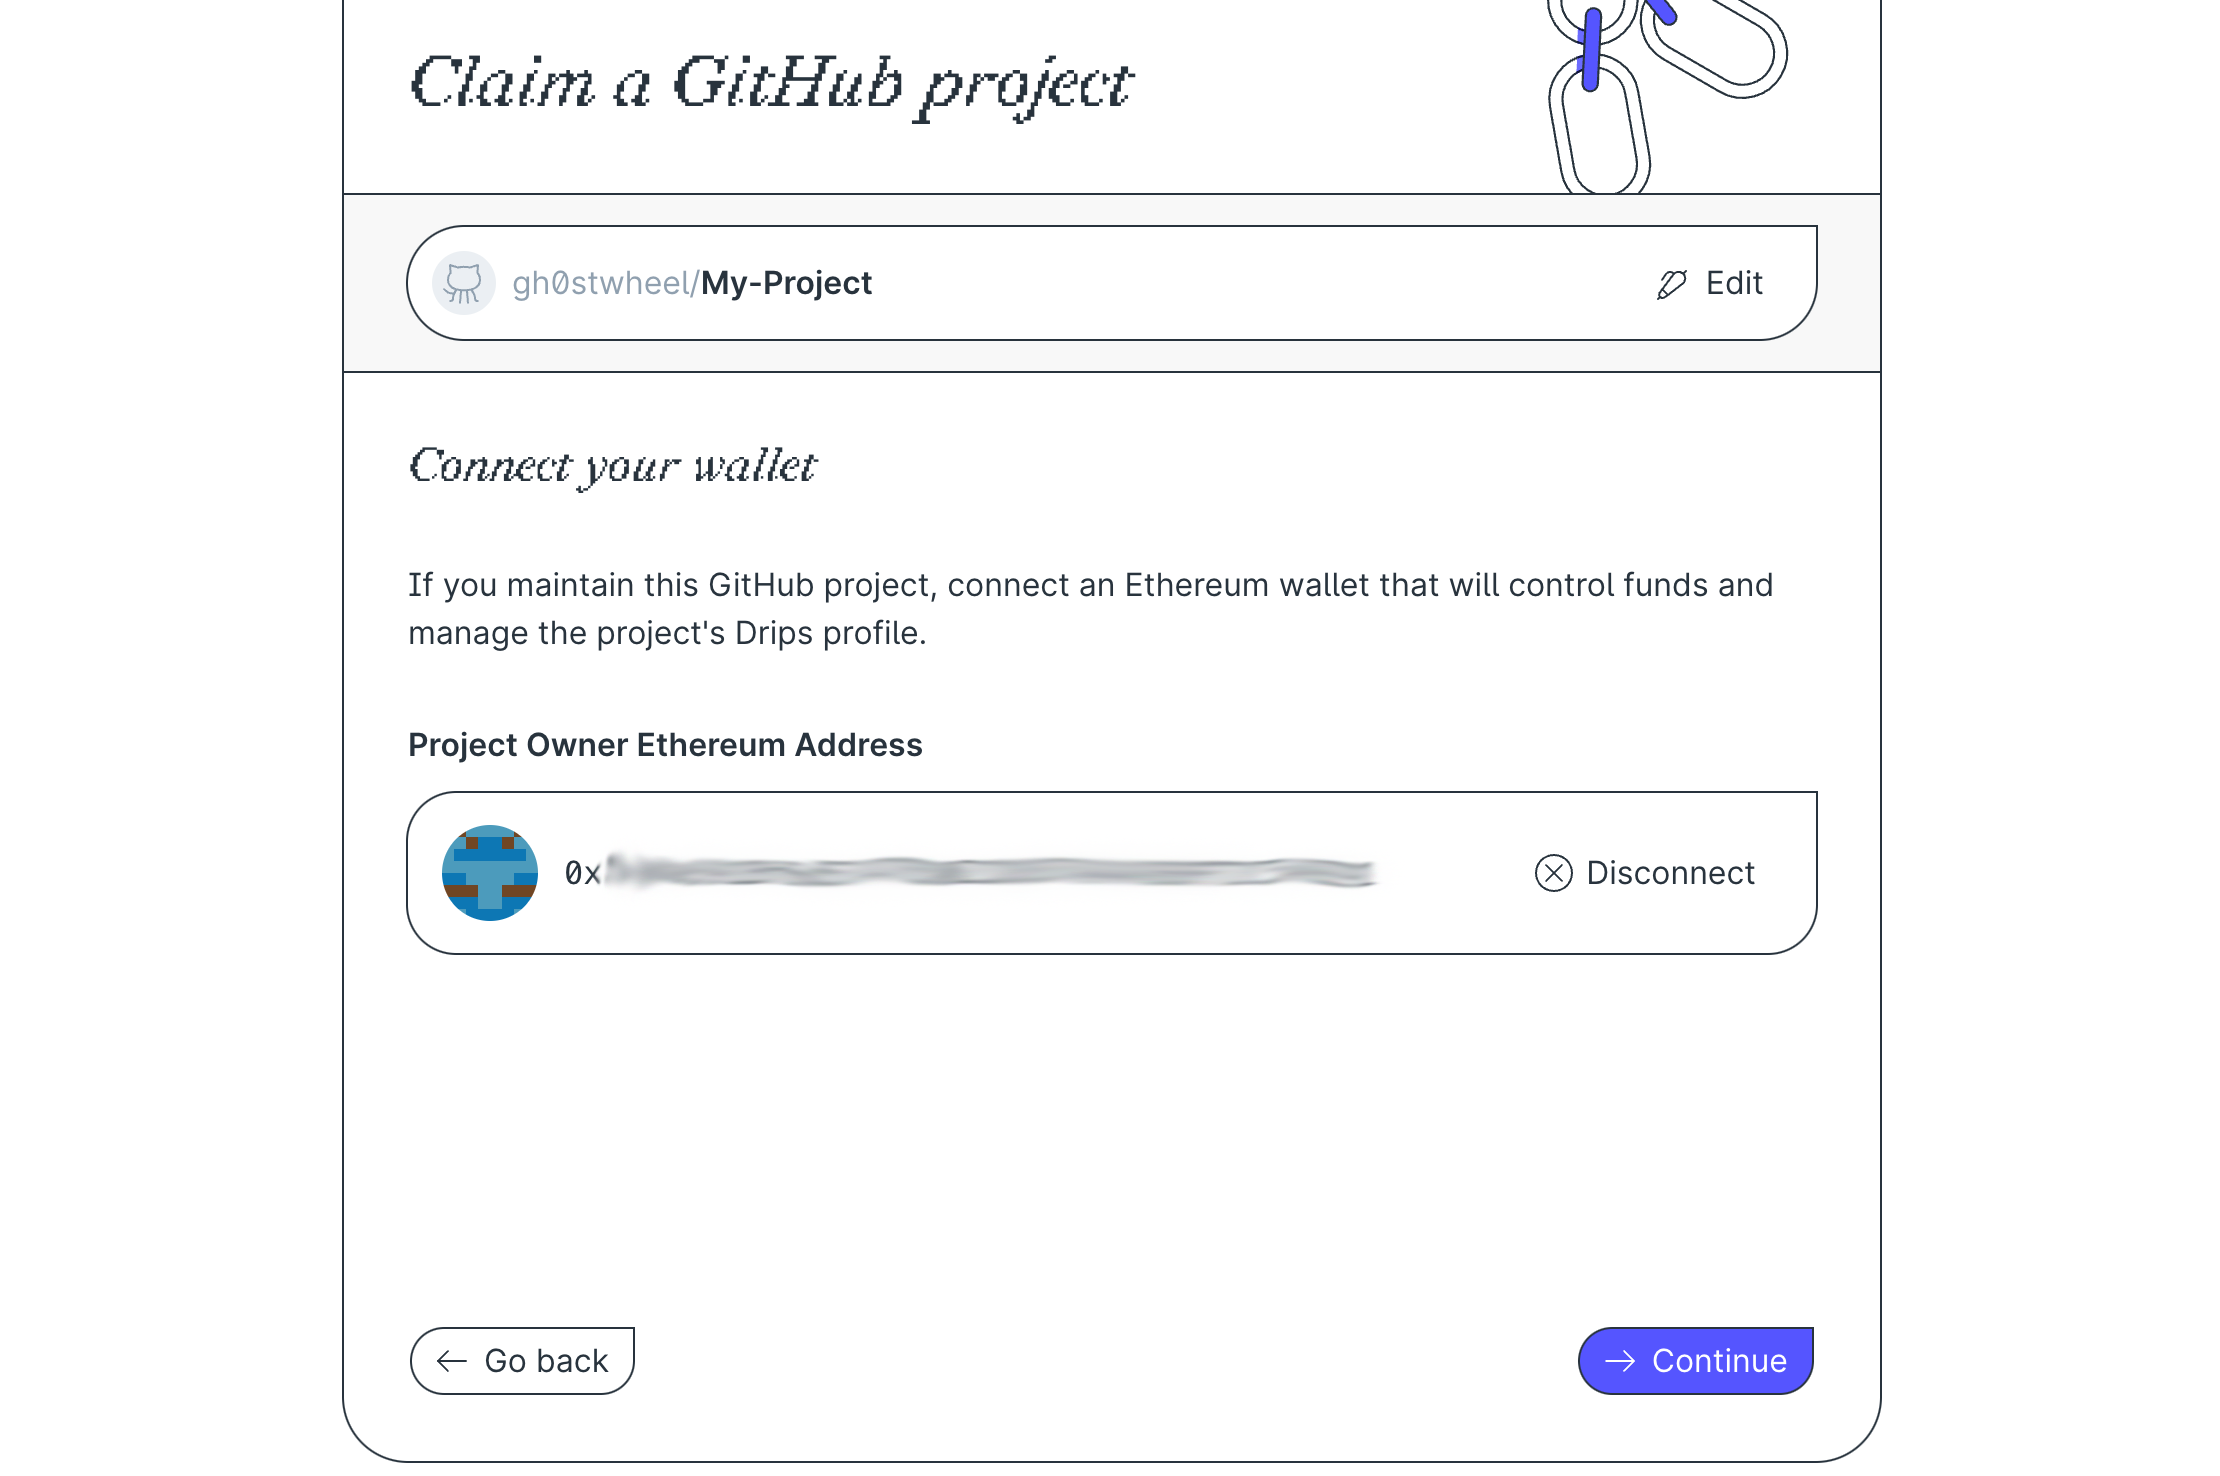 The Claim Project button